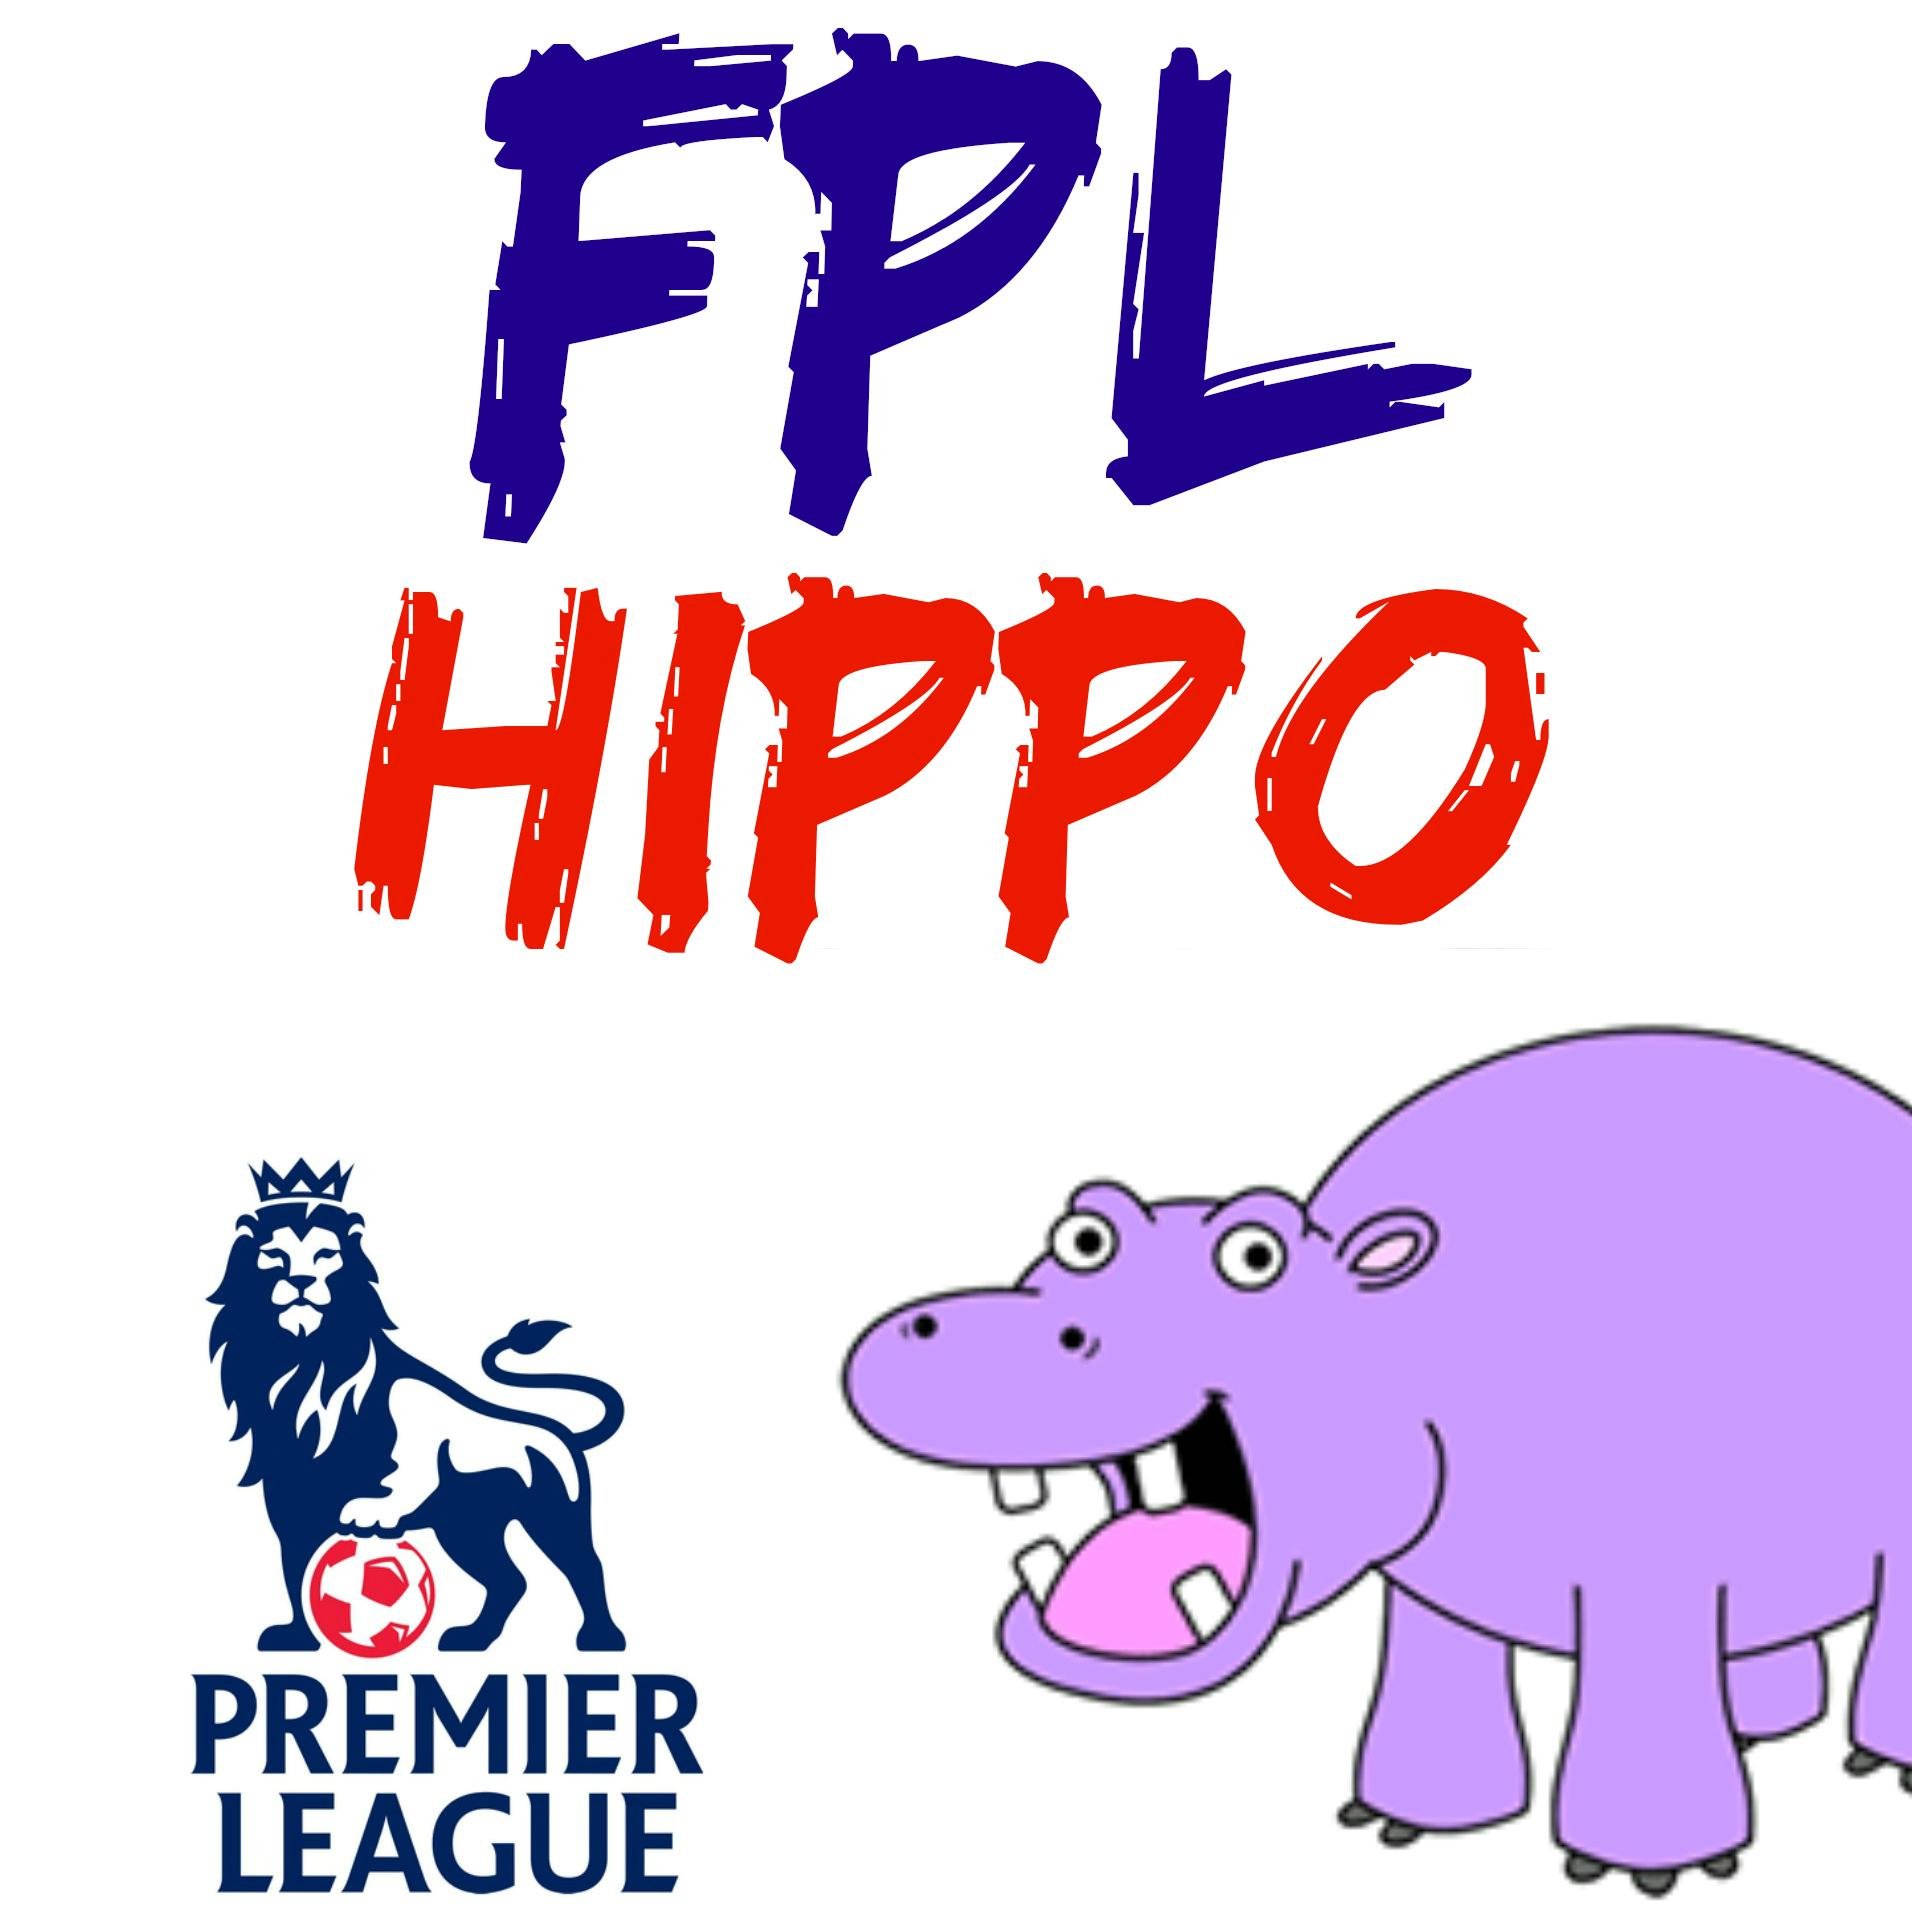 Tips, Team Reviews, Transfer Tips, Team Management help, Banter and a whole lot more. I also have a secret: I'm not actually a hippo.